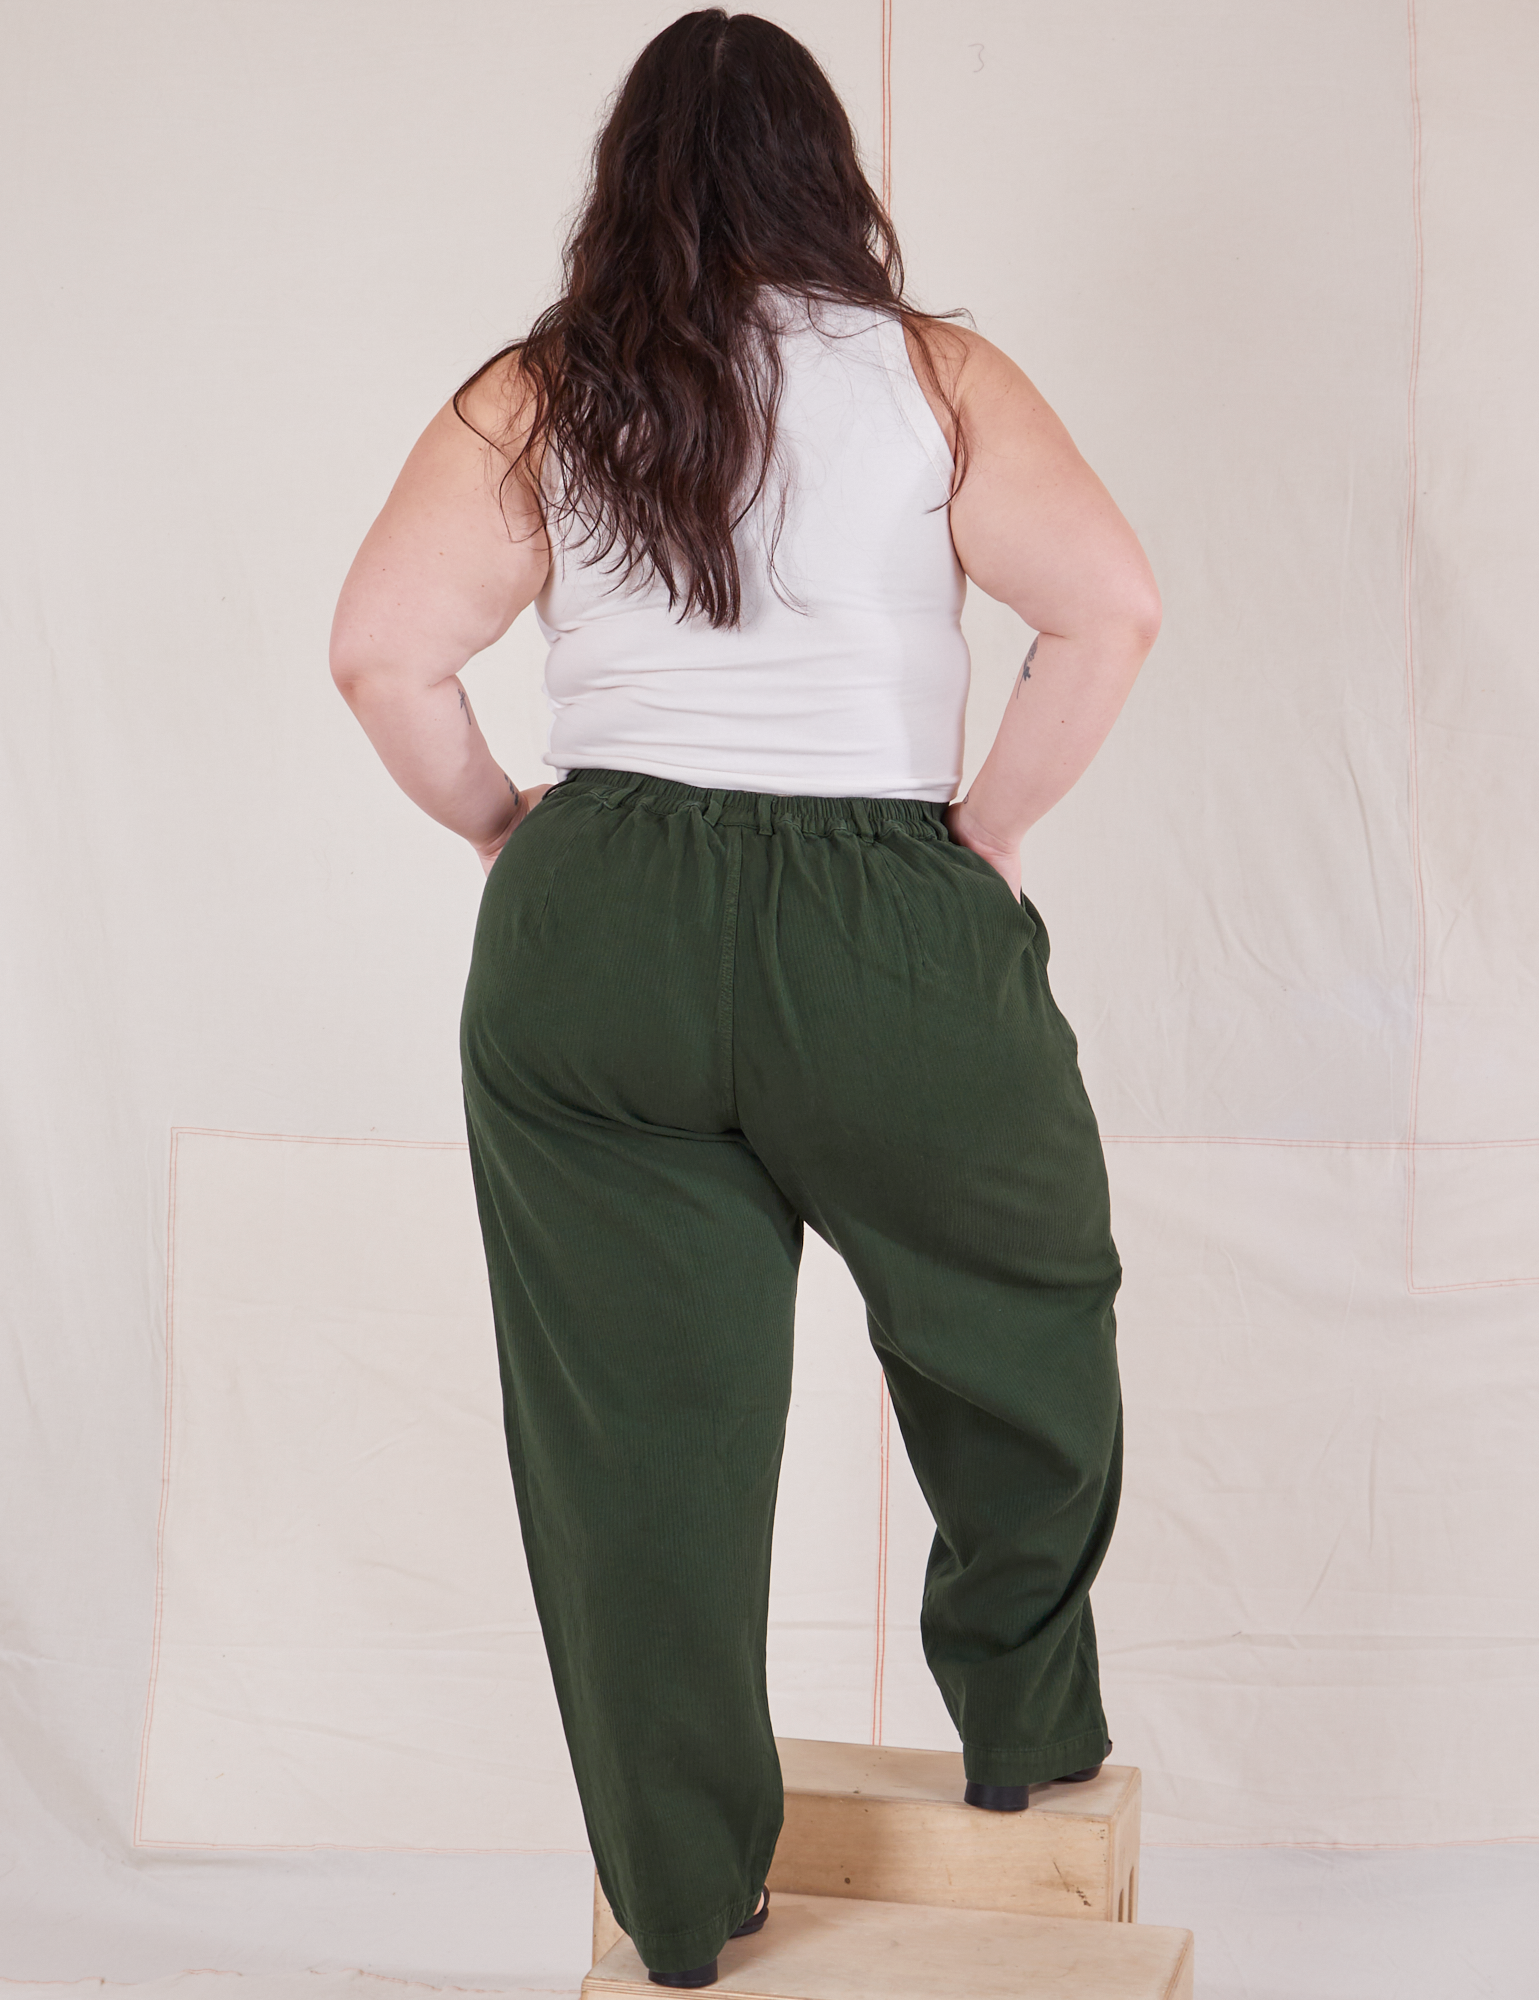 Back view of Heritage Trousers in Swamp Green and Cropped Tank Top in vintage tee off-white on Ashley